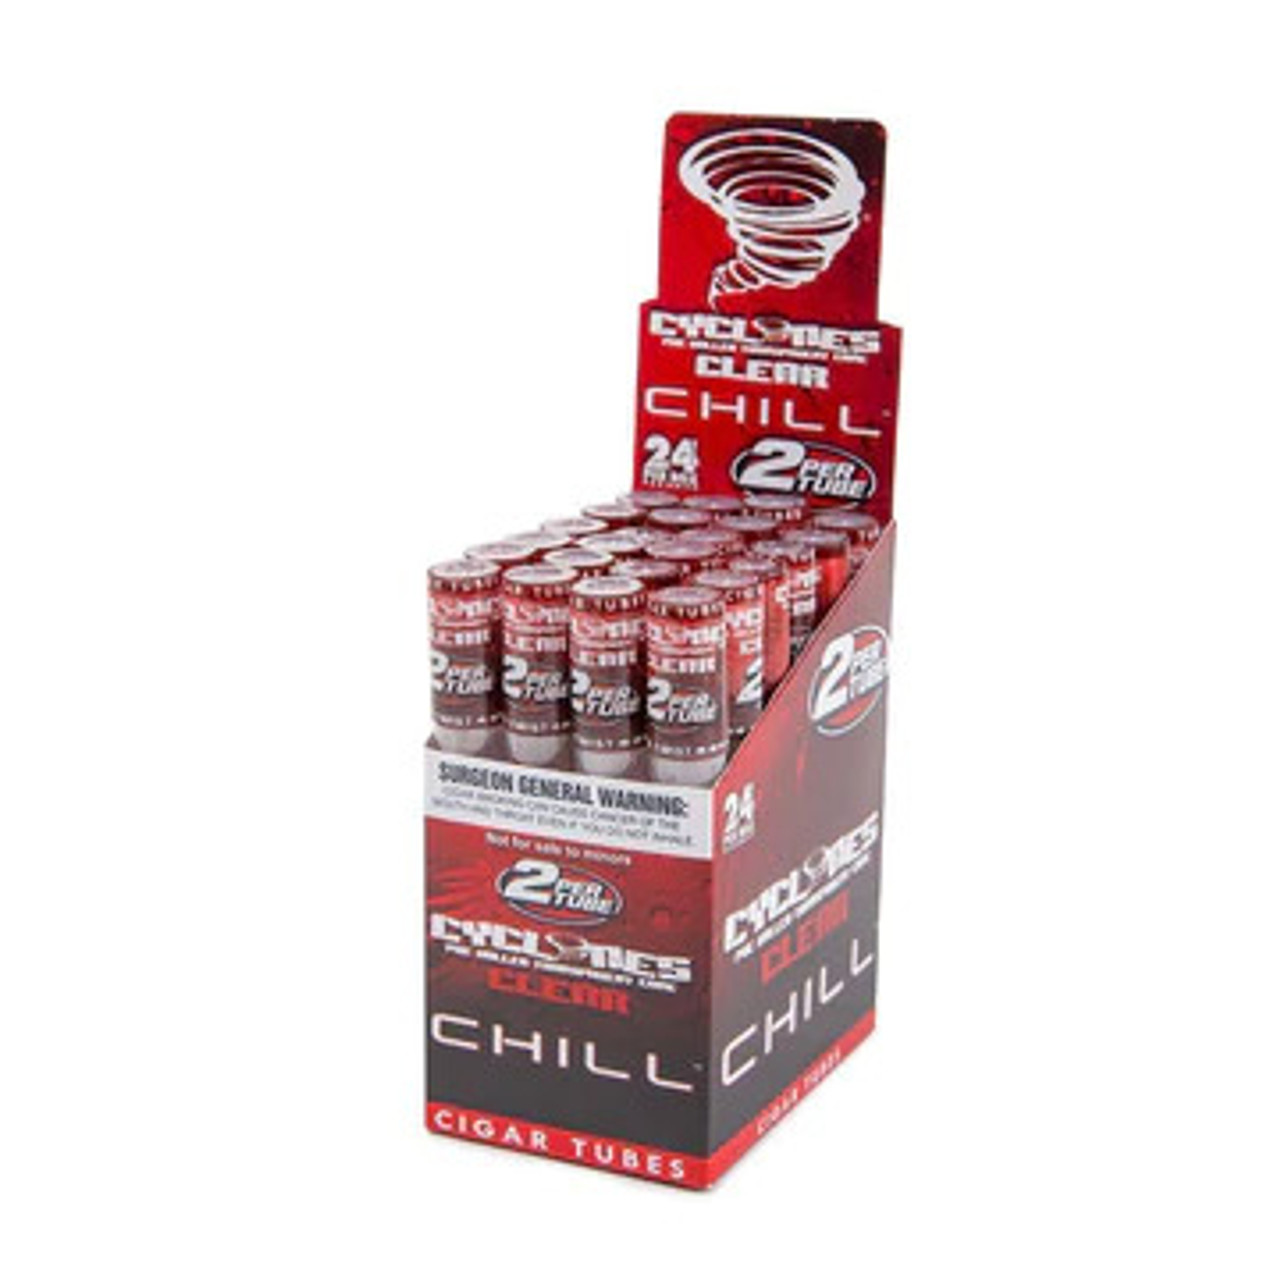 Cyclones Clear Cones - Chill Red - 24 ct. Display